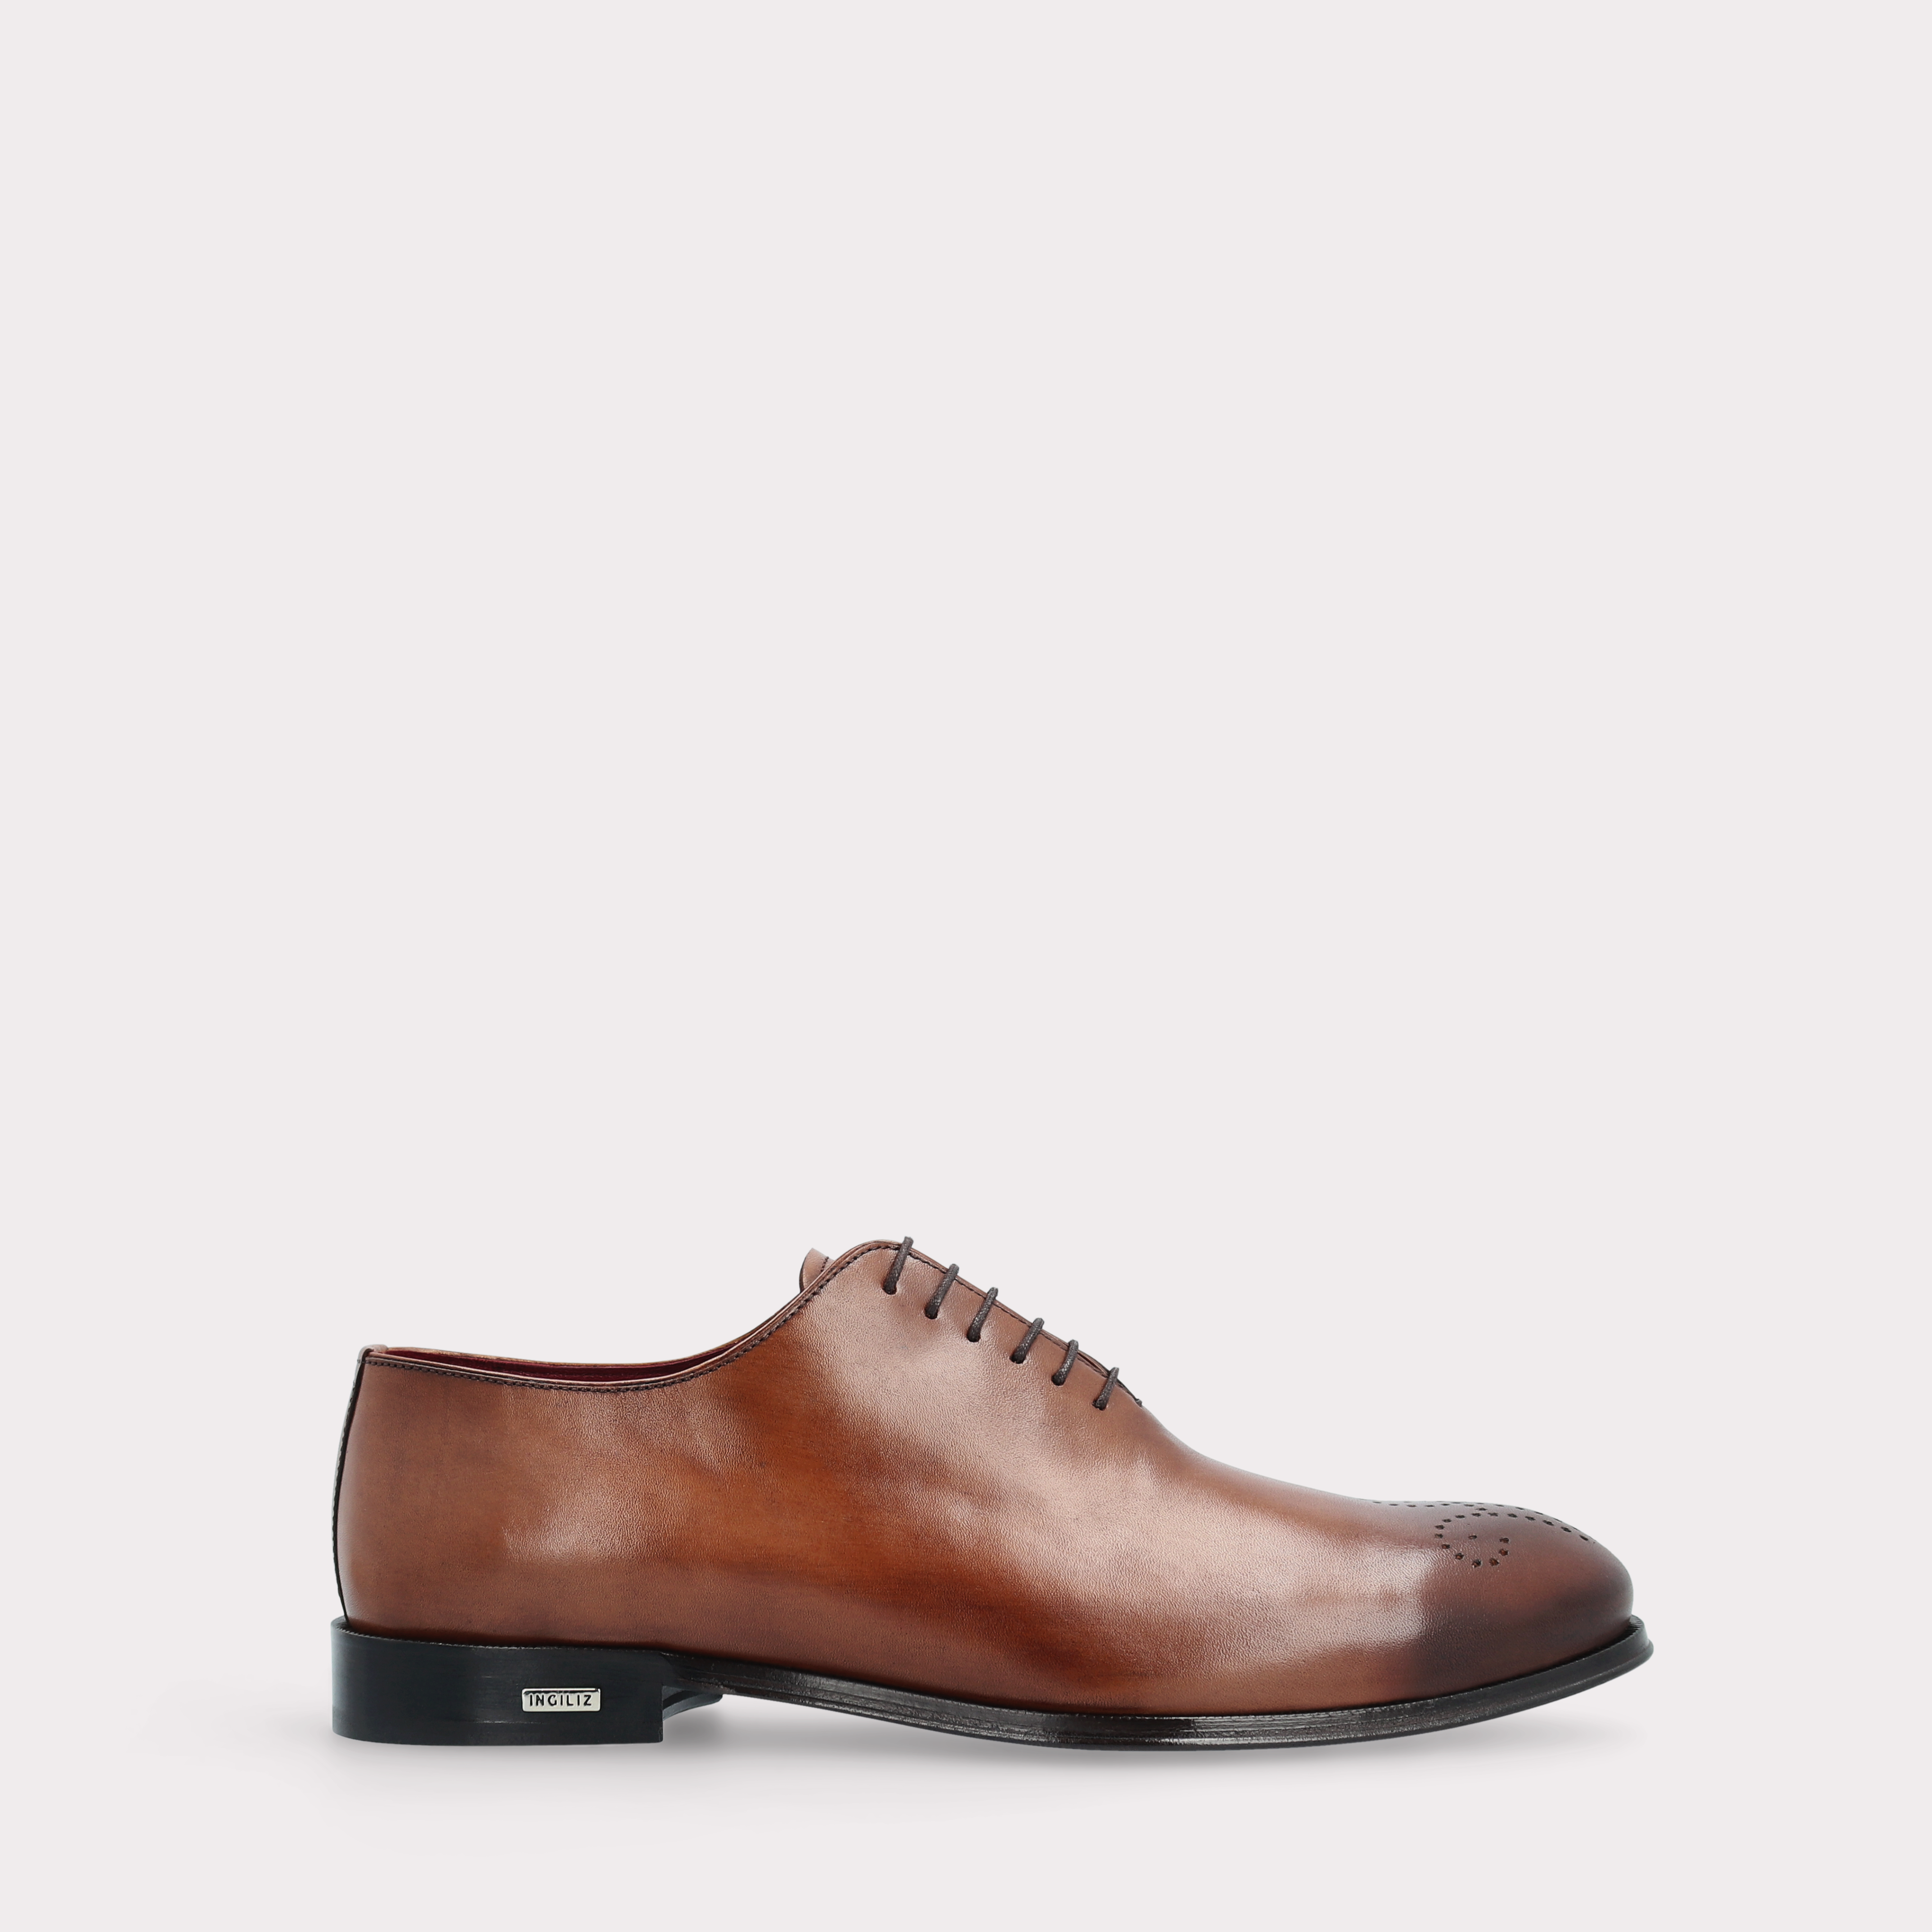 PRATO 01 brown leather oxford shoes